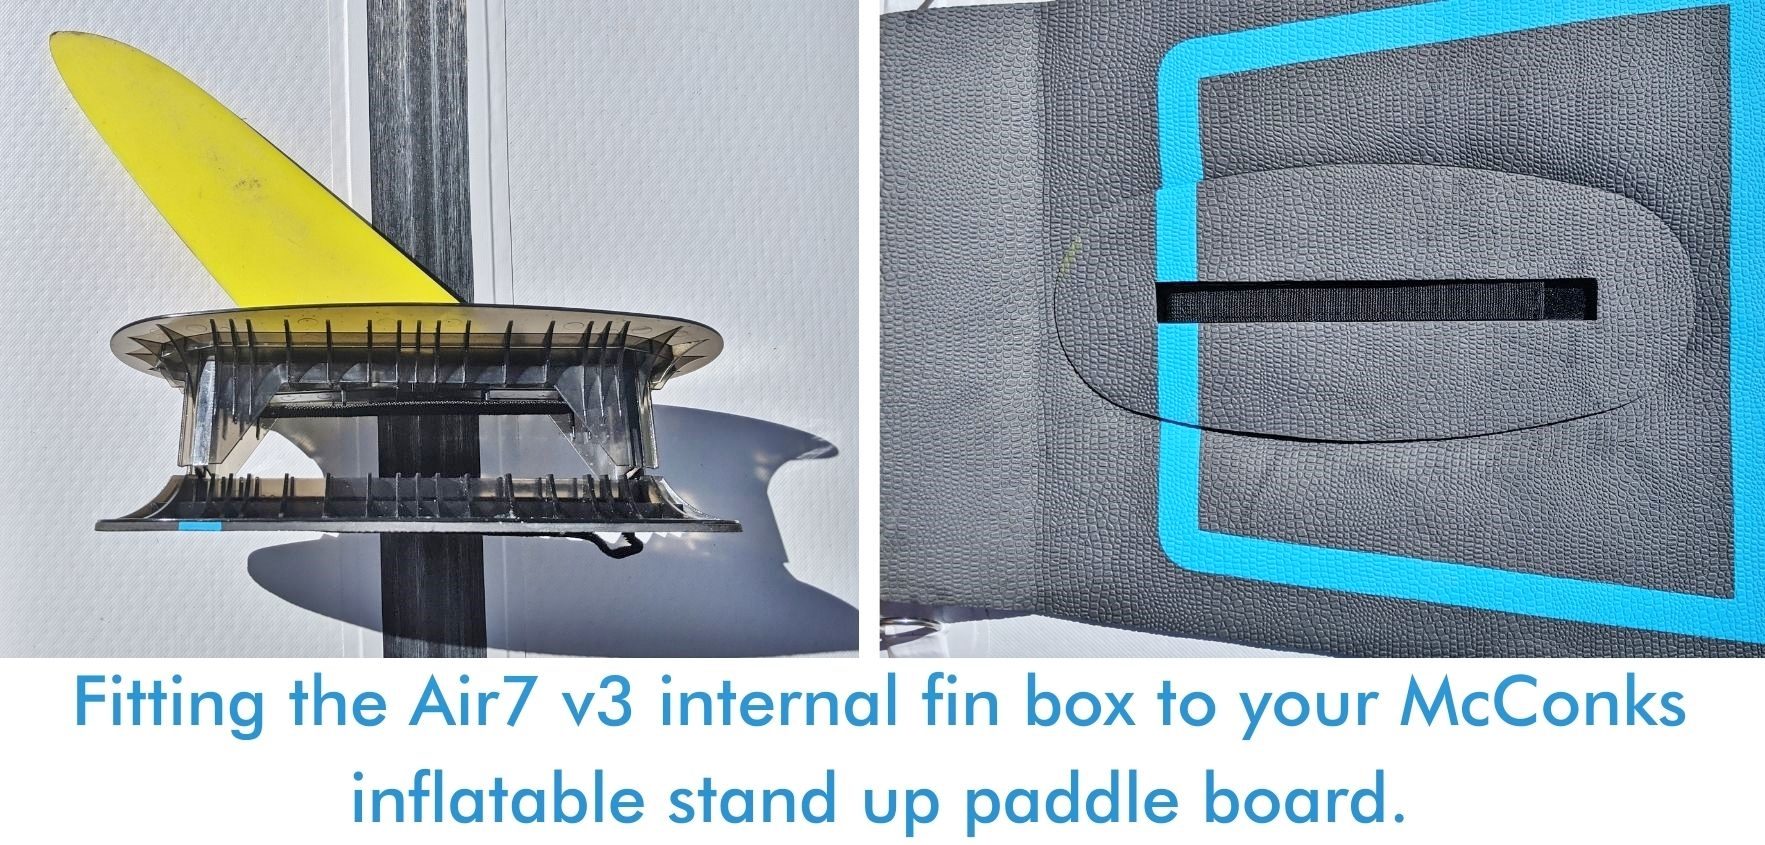 You are currently viewing Fitting the Air7 v3 internal fin box to your McConks inflatable stand up paddle board.